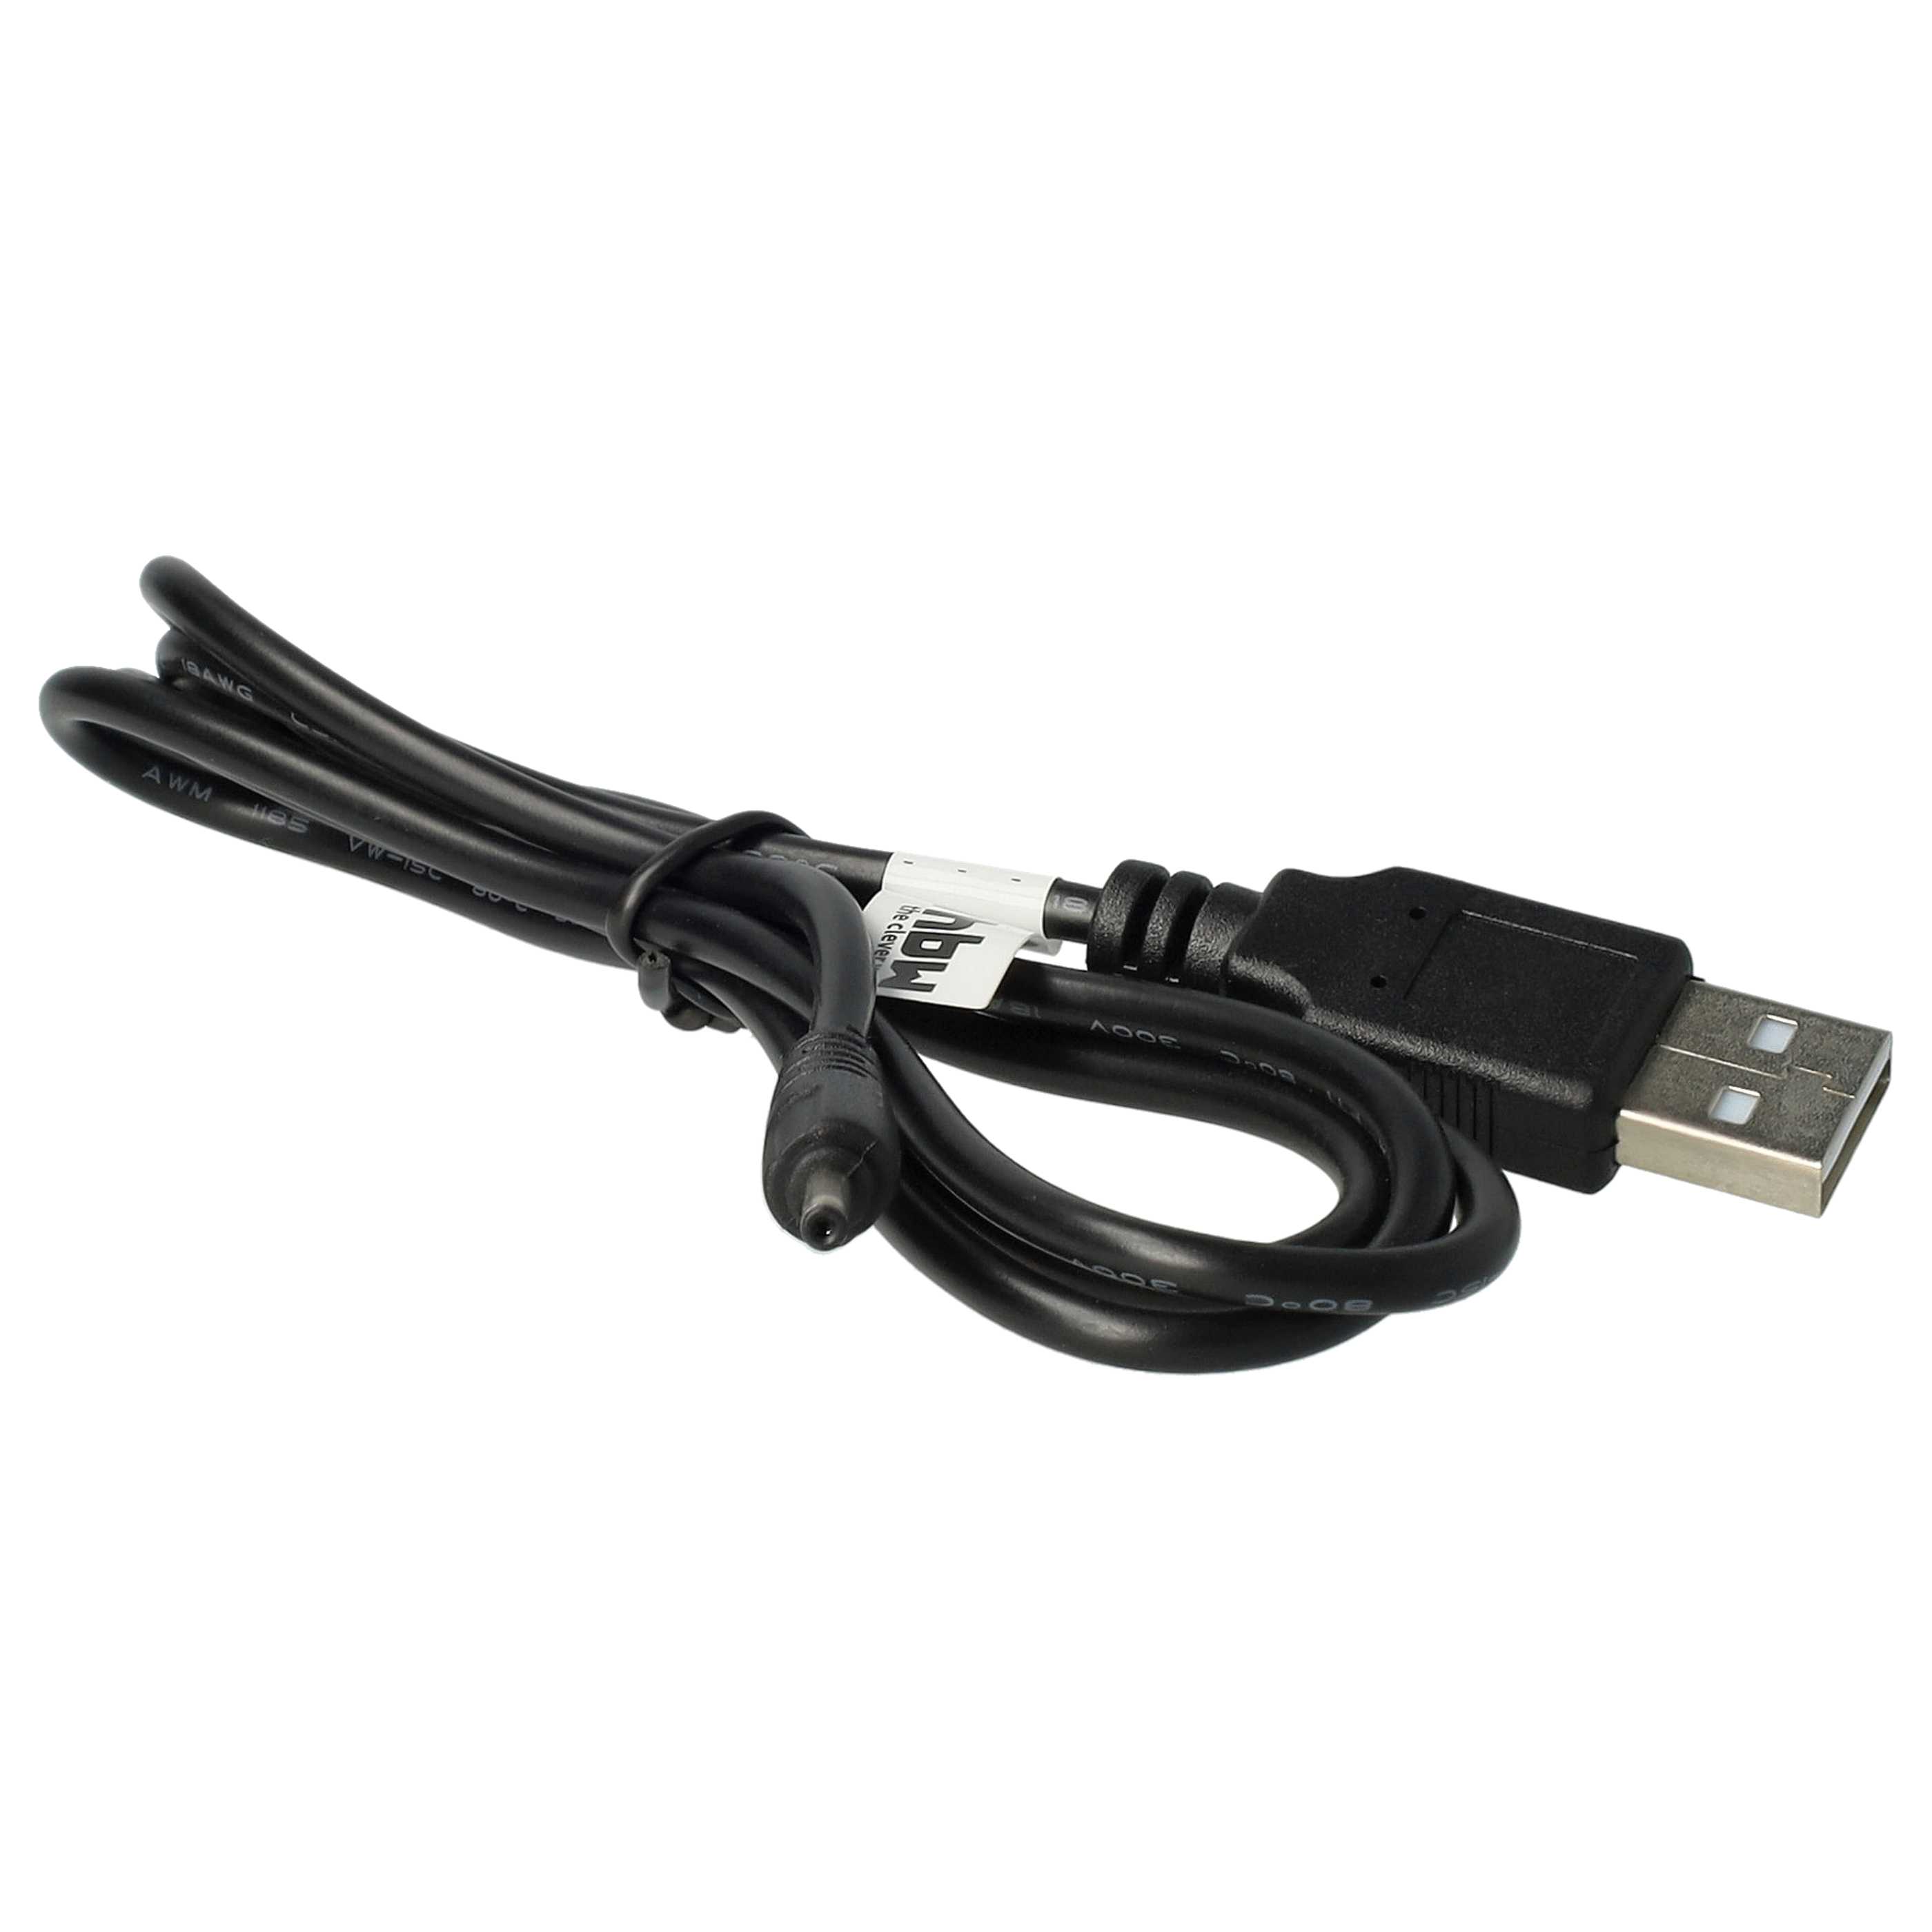 USB Charging Cable suitable for A90 Ampe Tablet etc. - 100 cm